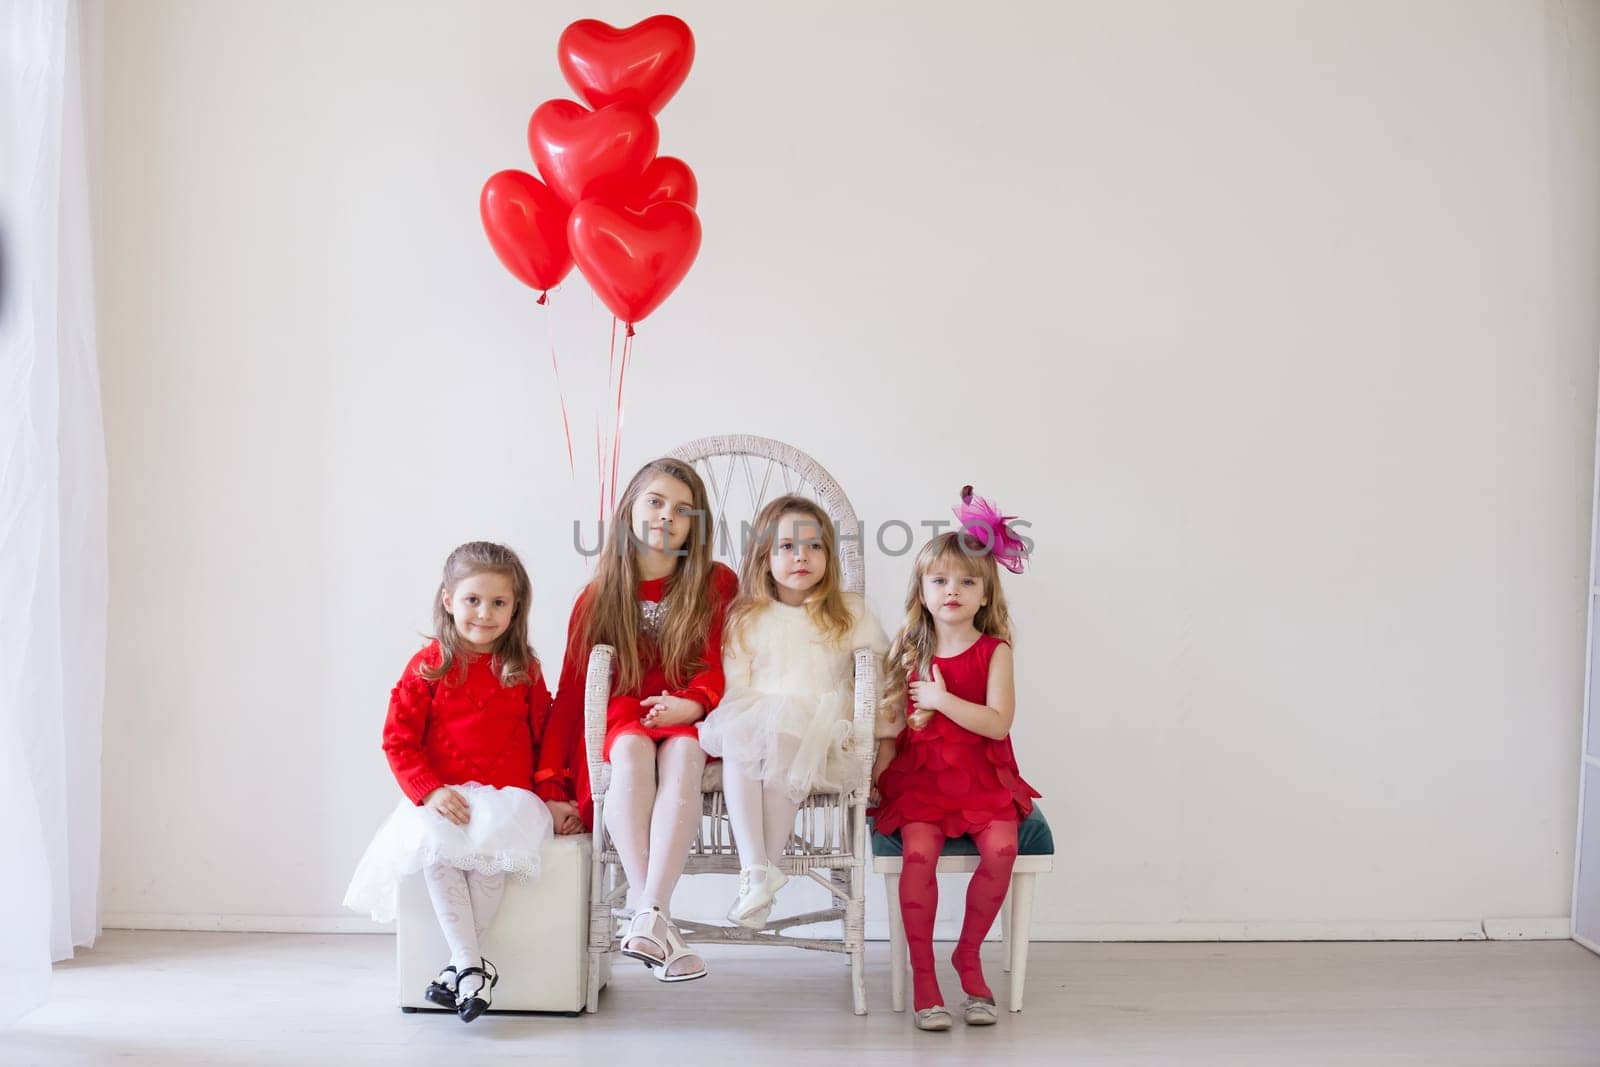 Kids with red balloons for birthday in the interior of the white room